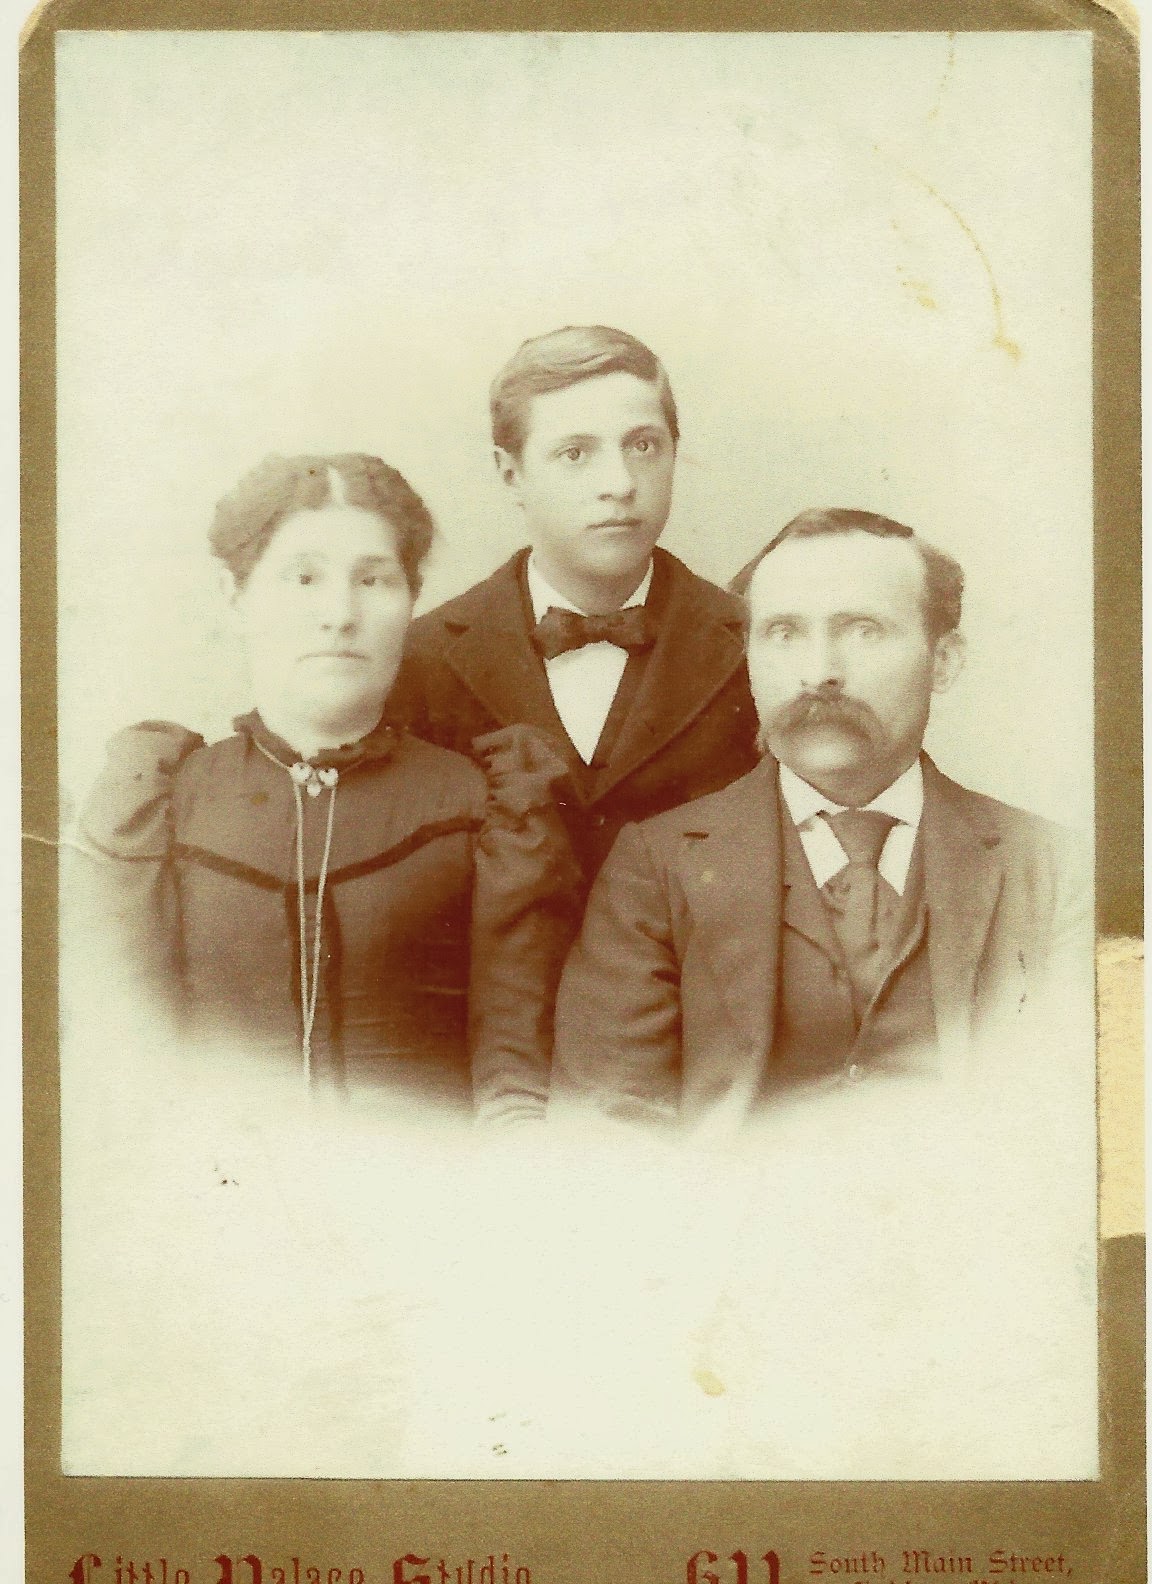 Climbing My Family Tree: Kathryn (1857-1931), Philip (1882-1967), and John Snyder (1854-1925)